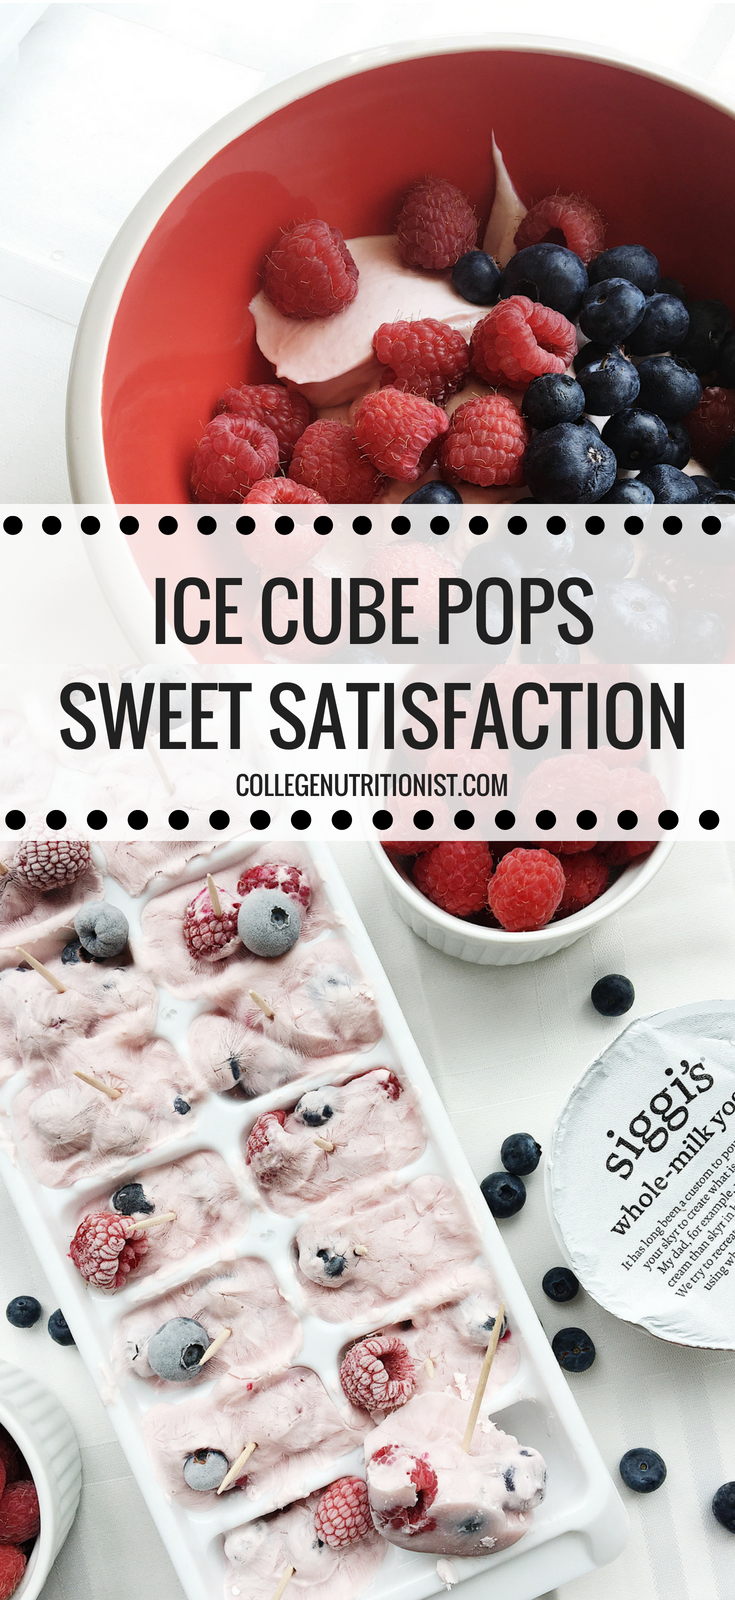 Ice Cube Pops for Sweet Satisfaction